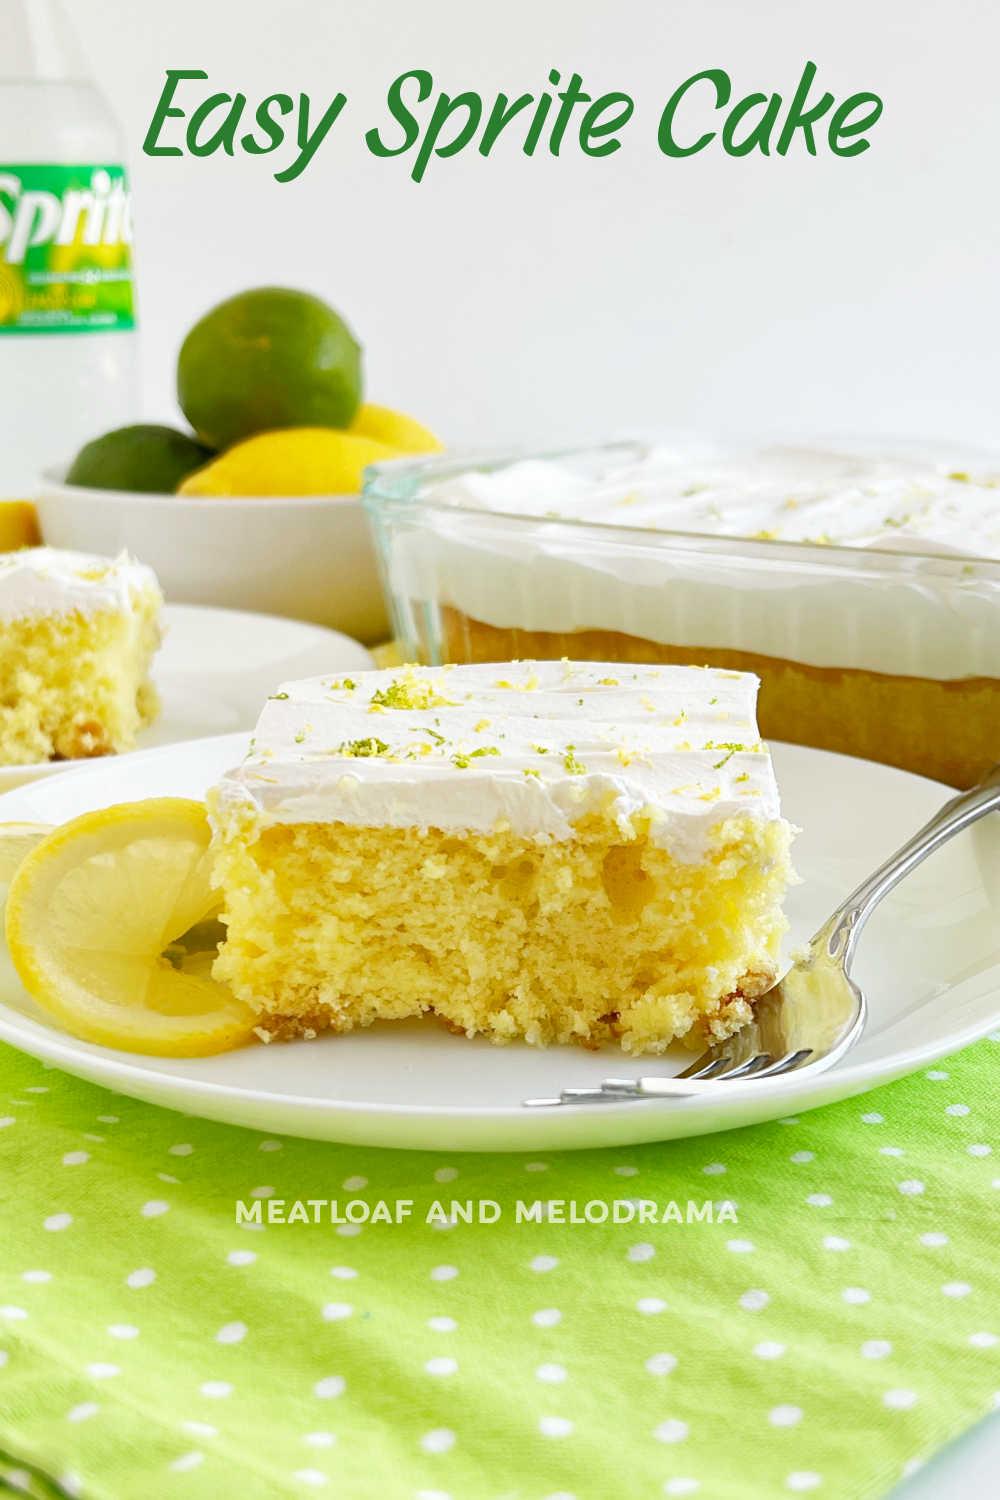 25 Yellow Cake Mix Recipes You'll Adore - Insanely Good